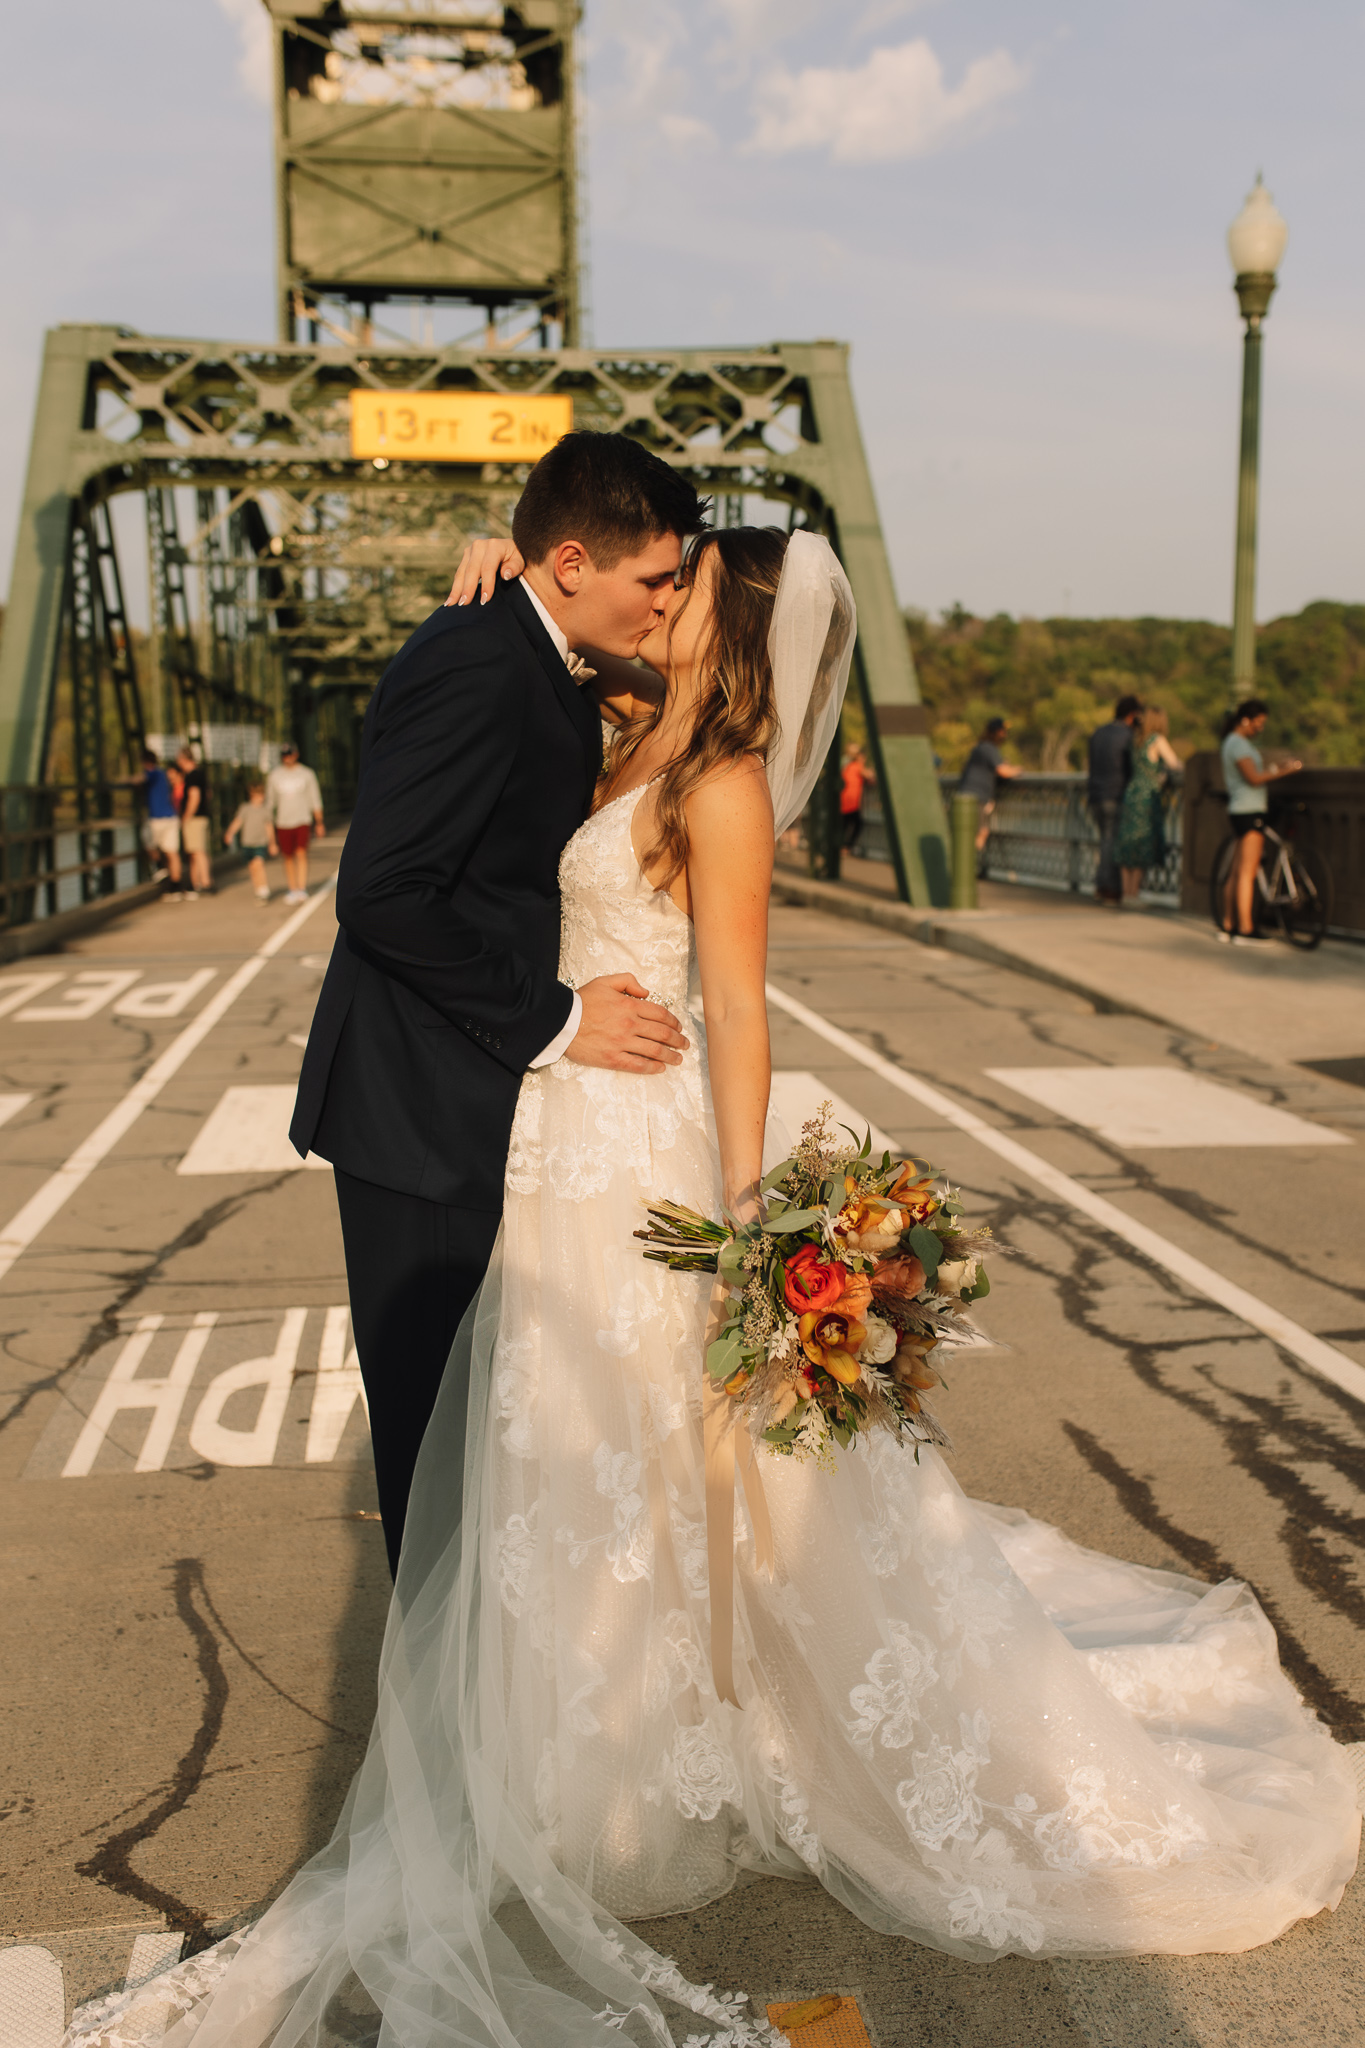 A groom holding his bride and pulling her in by the waist as they kiss in front of the Stillwater bridge in Minnesota